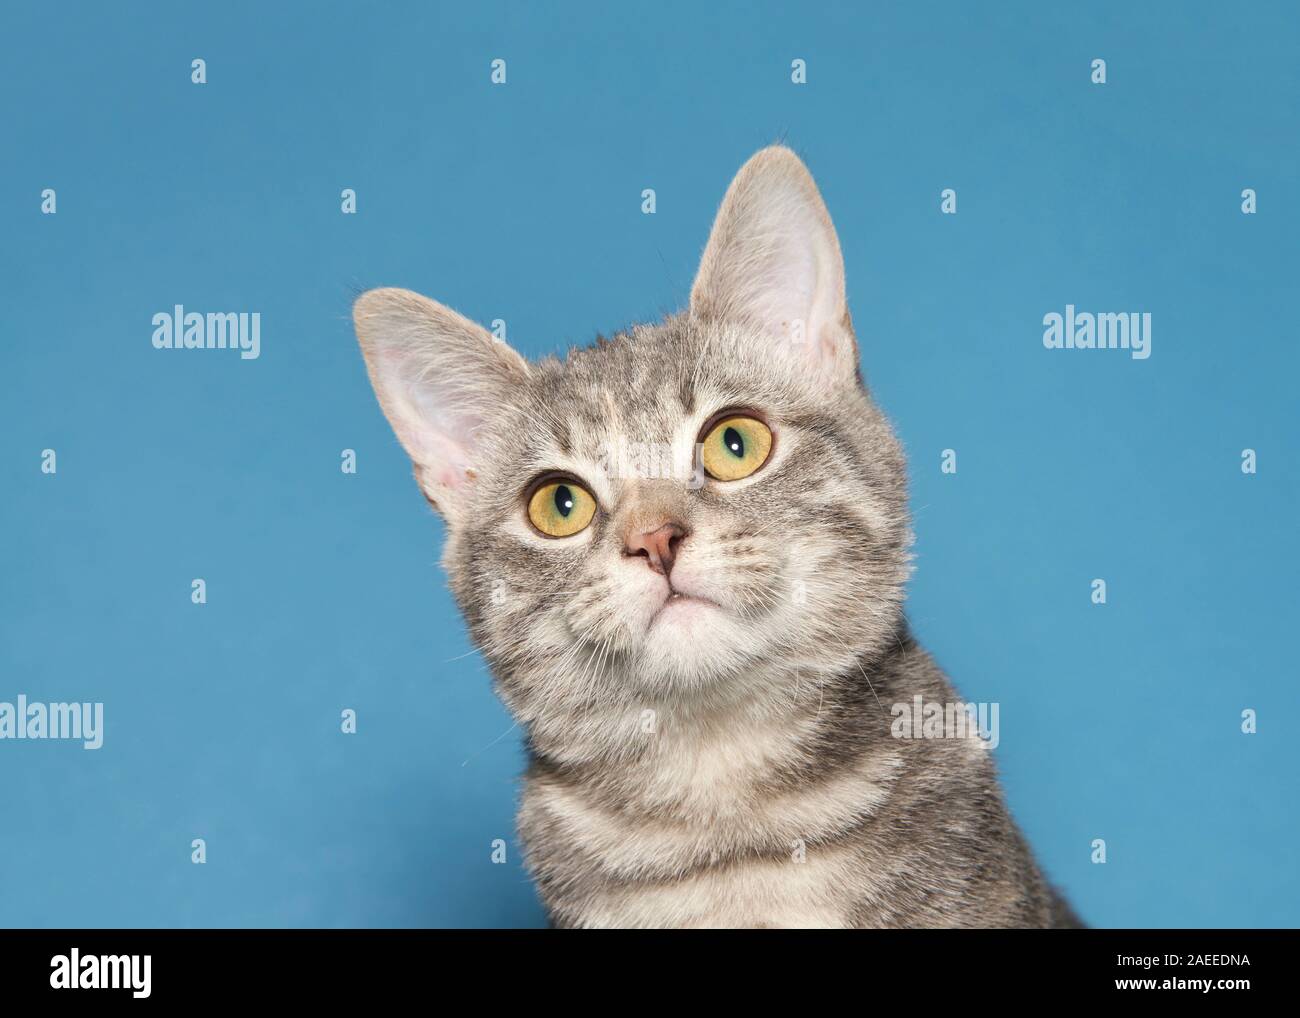 Portrait of an adorable gray tabby kitten looking slightly up and to viewers left with head tilted sideways. Blue background with copy space. Stock Photo